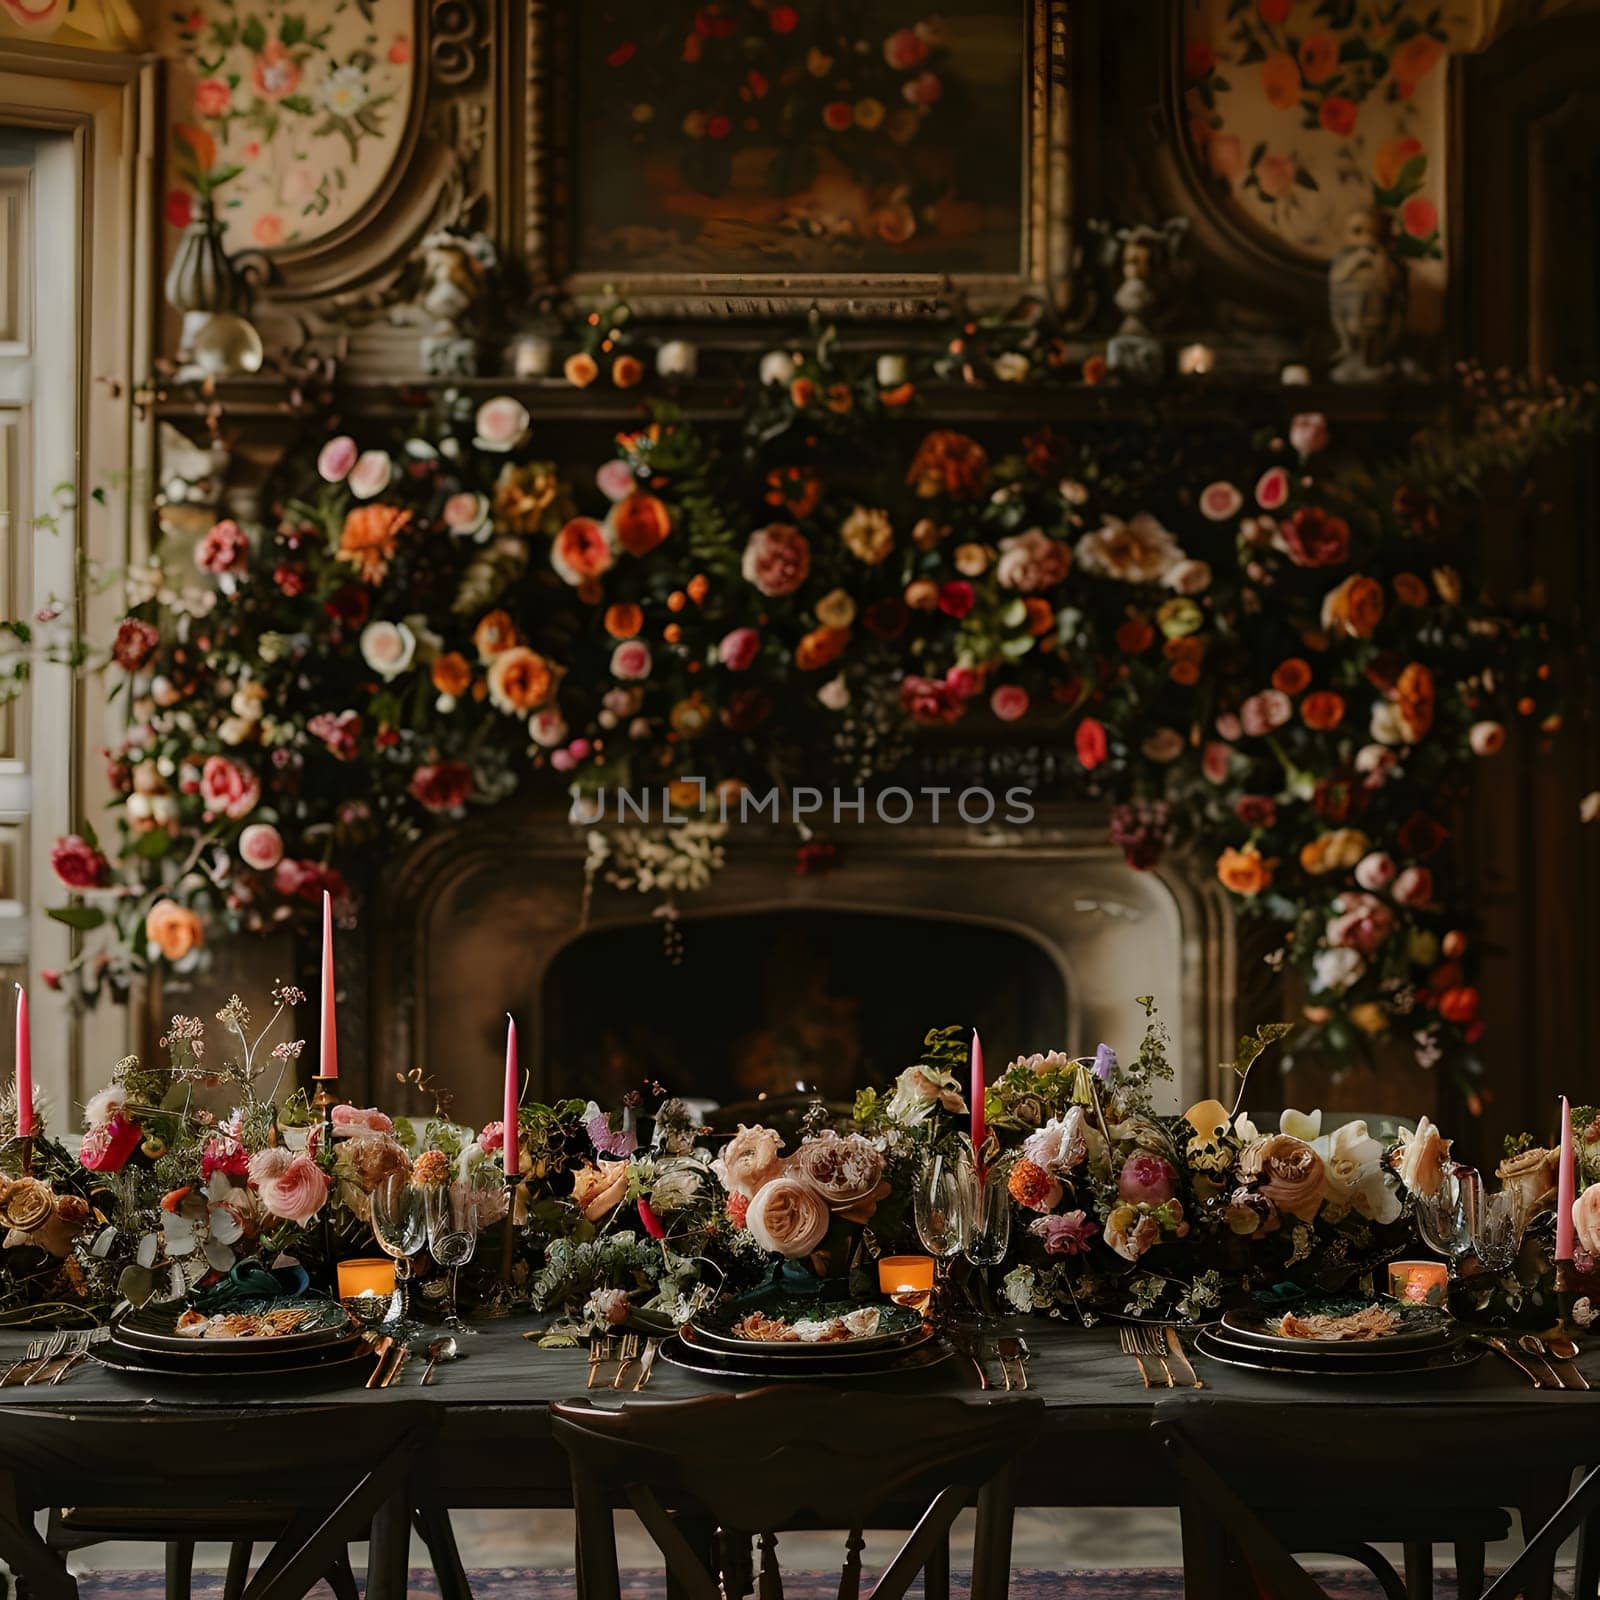 An elegant table is placed in front of the fireplace, adorned with carefully arranged flowers and candles, creating a beautiful and festive atmosphere in the buildings interior design